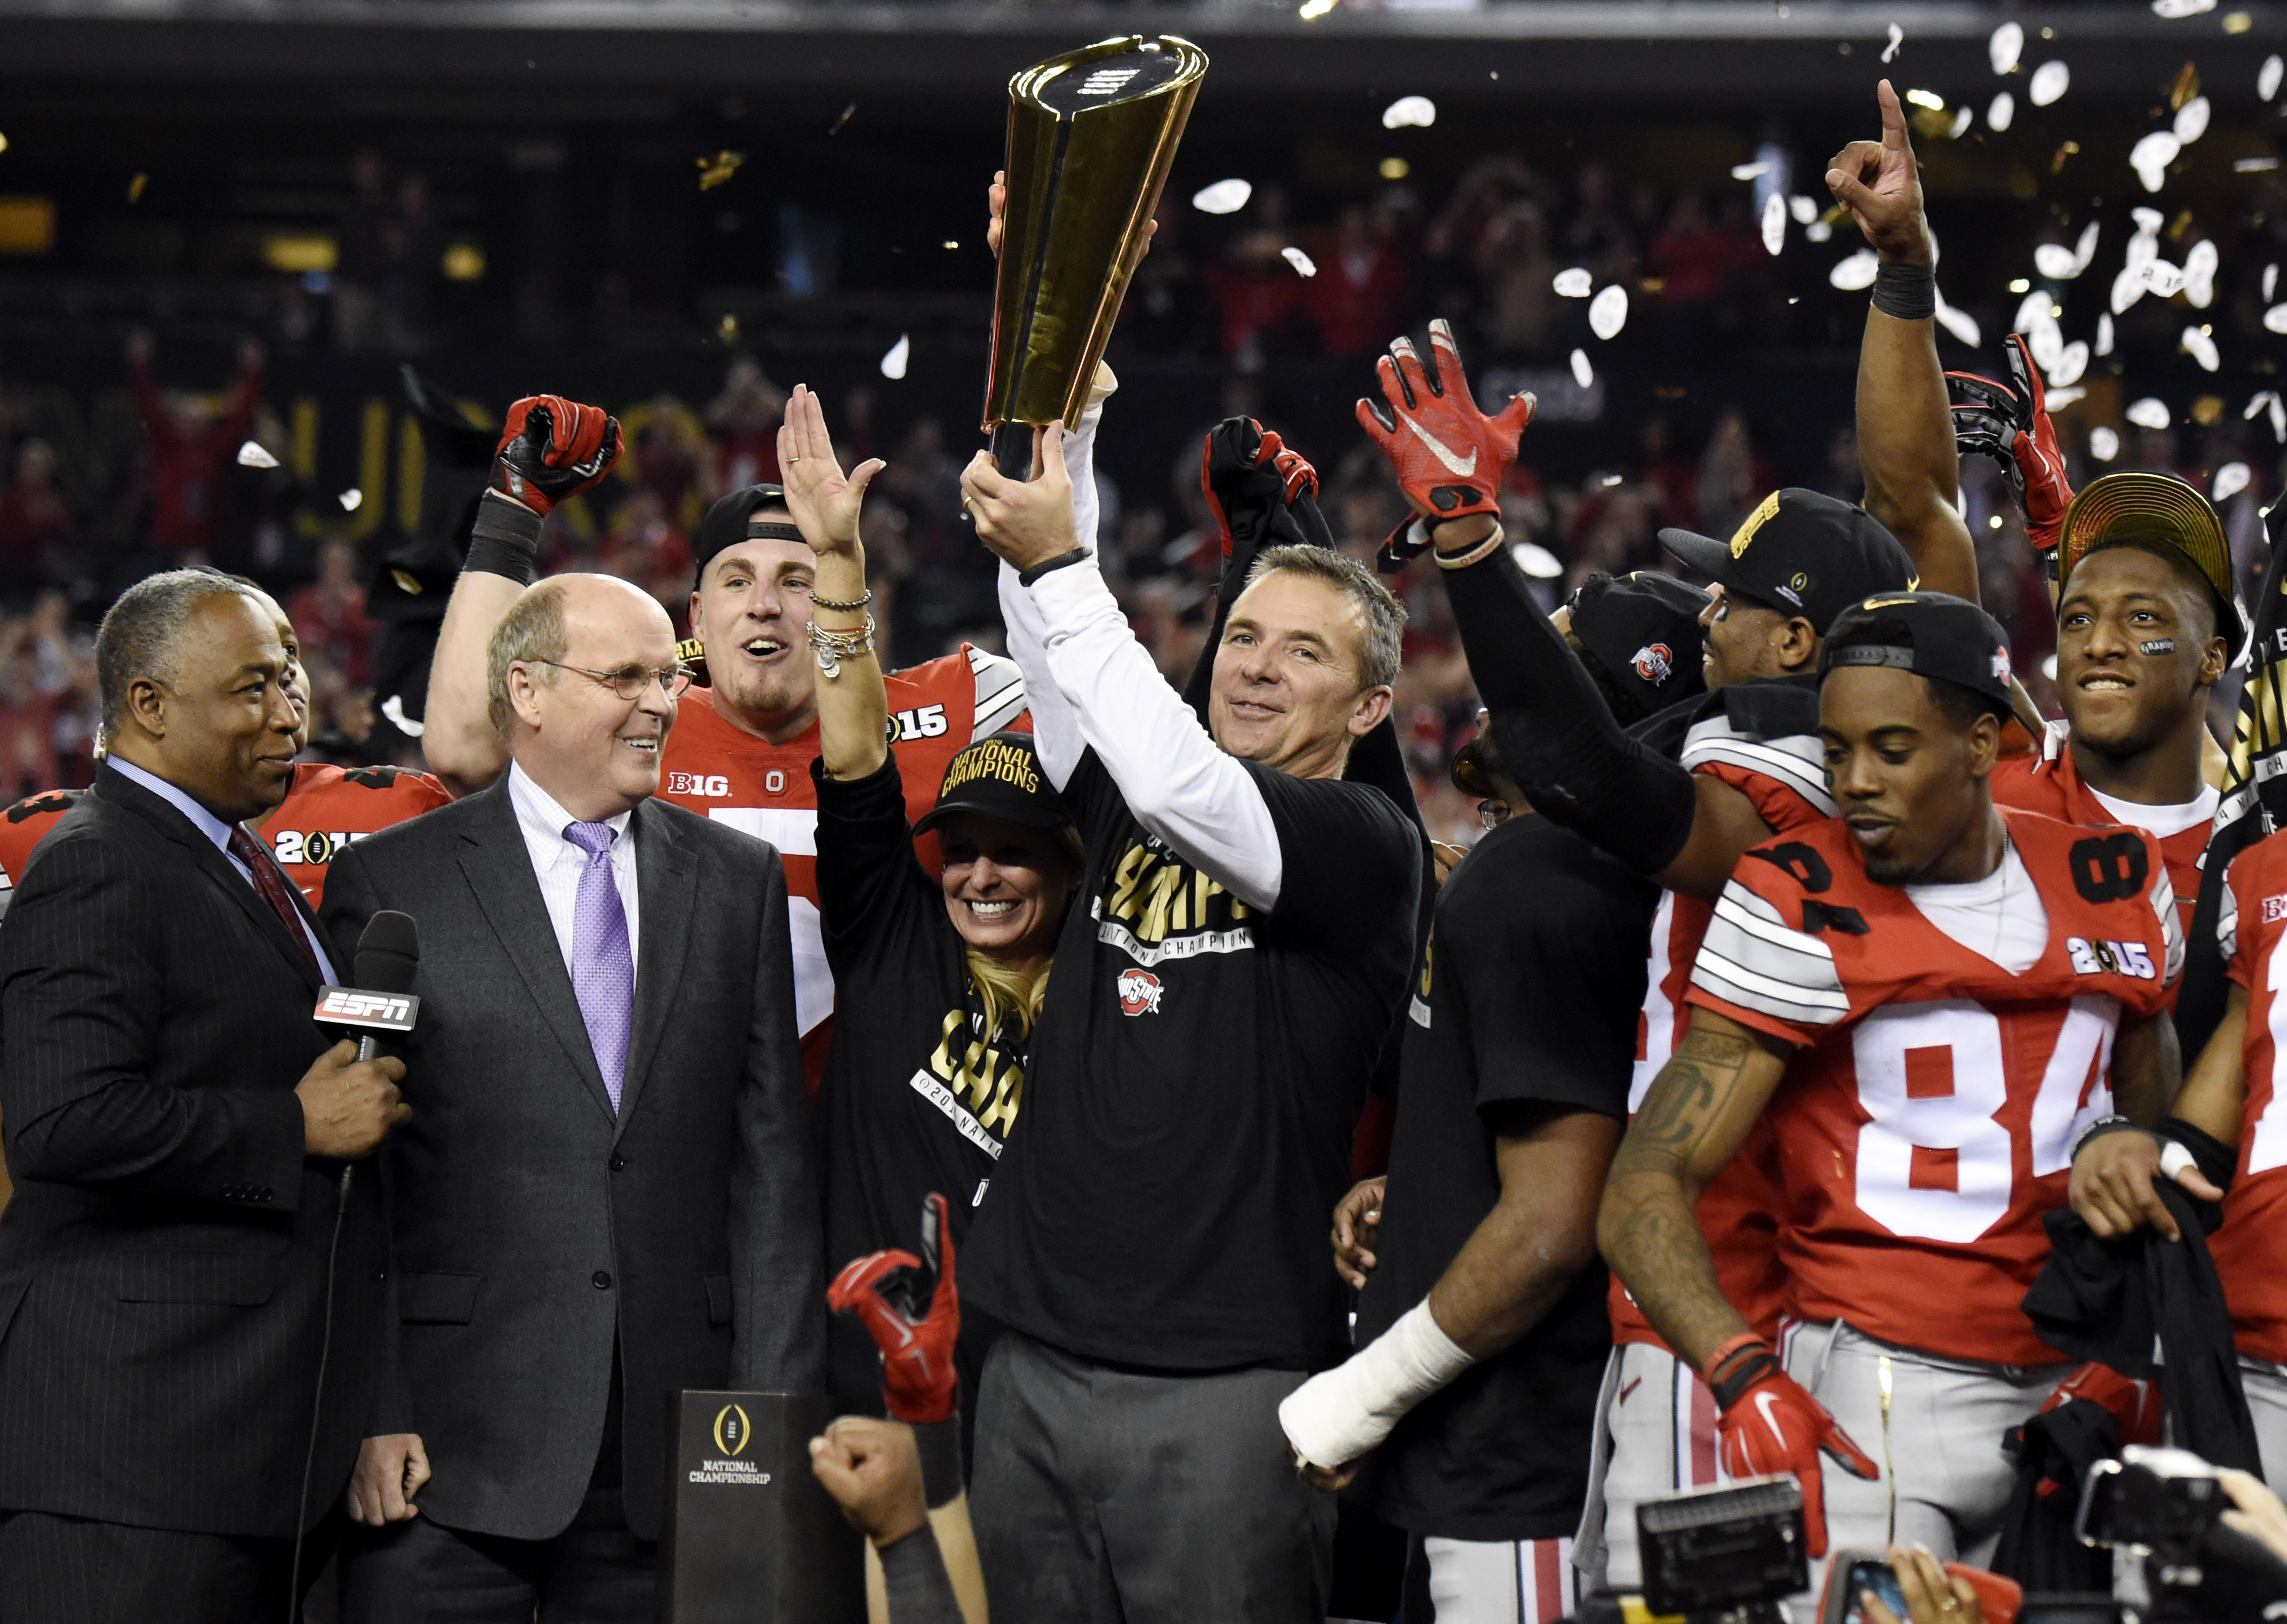 Buckeyes voted first unanimous preseason No. 1 in AP poll history